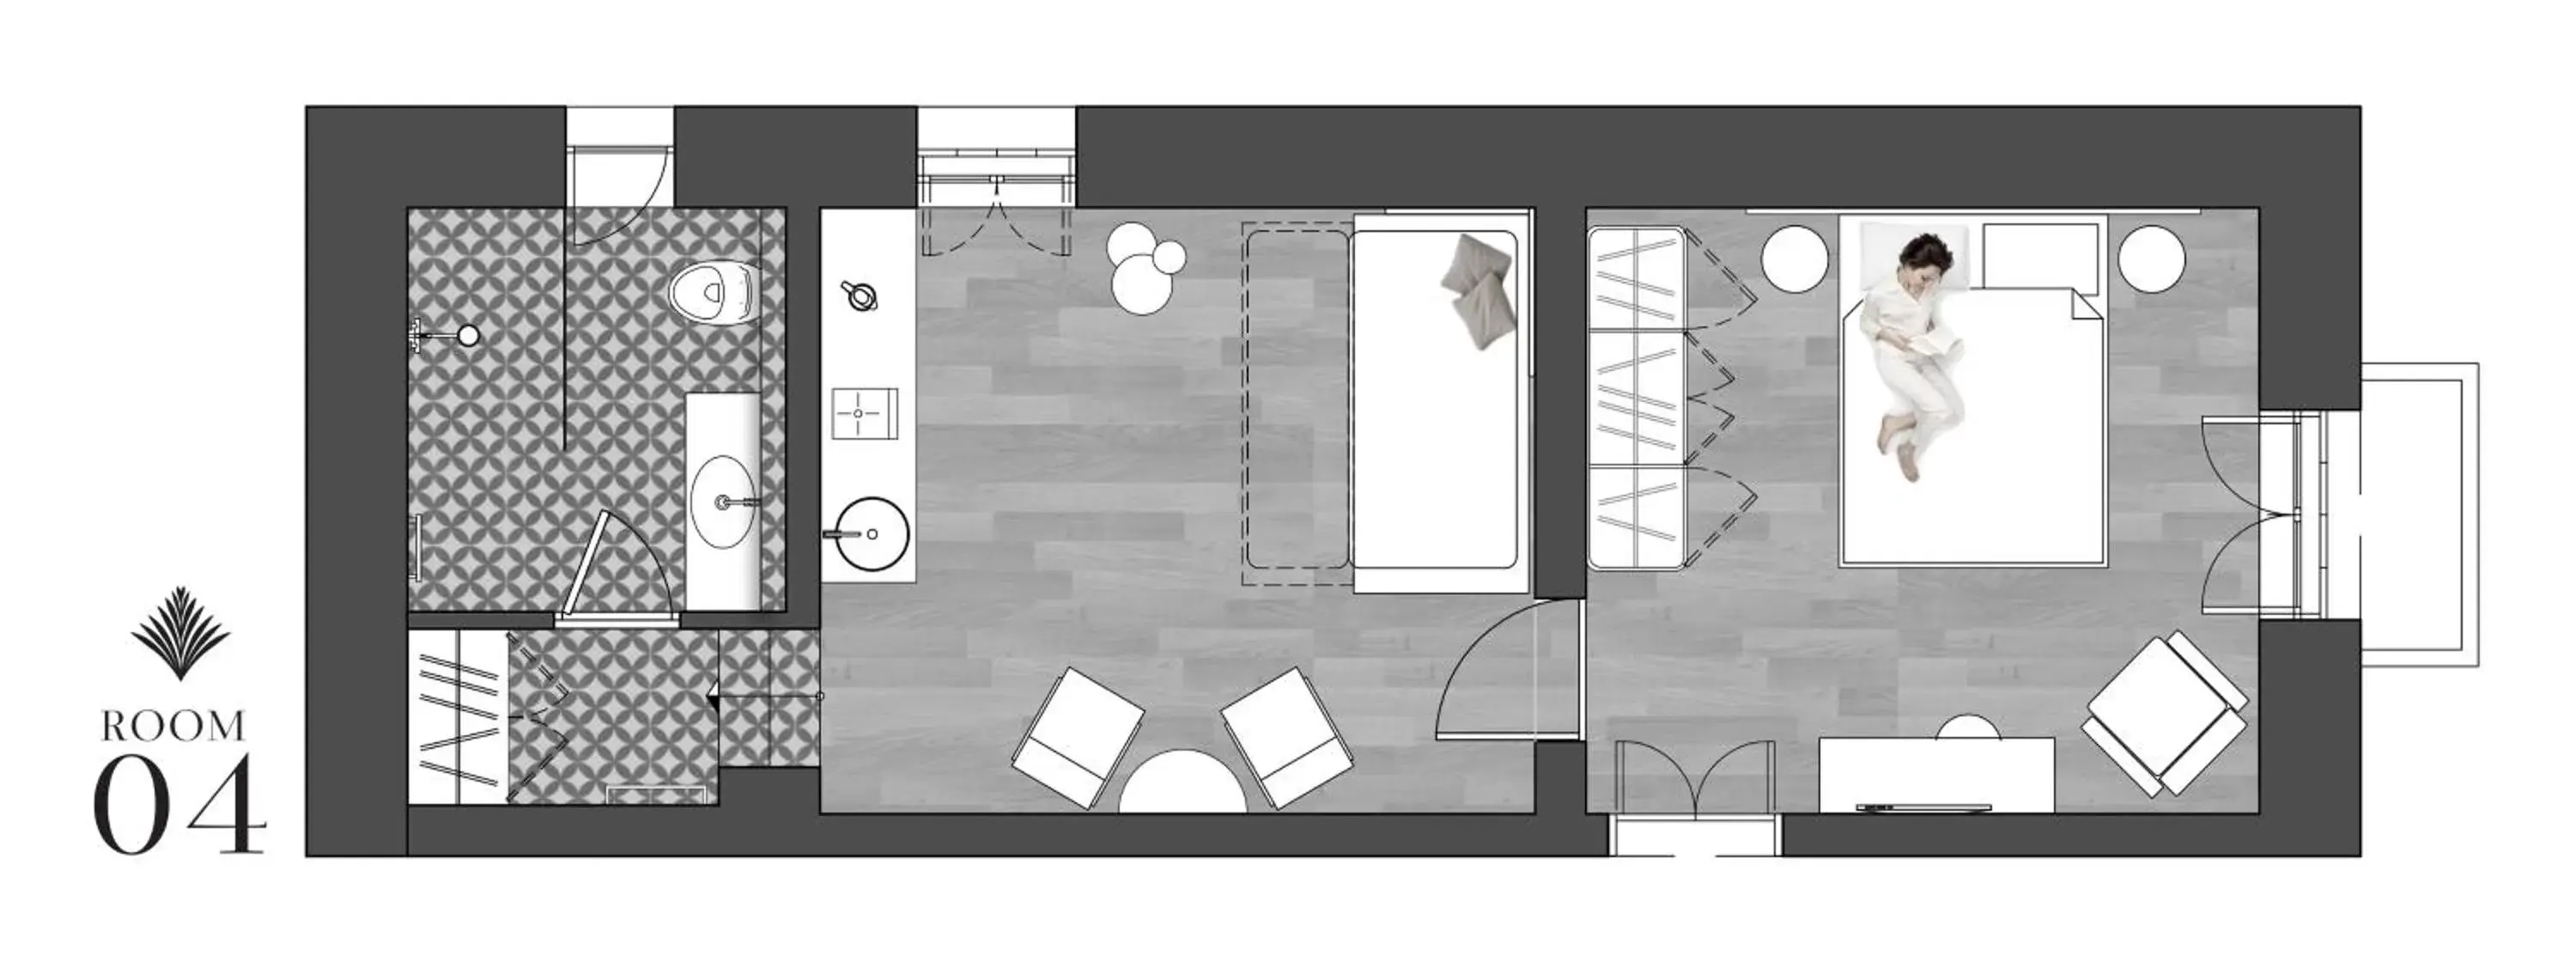 Floor Plan in The Anthemion House